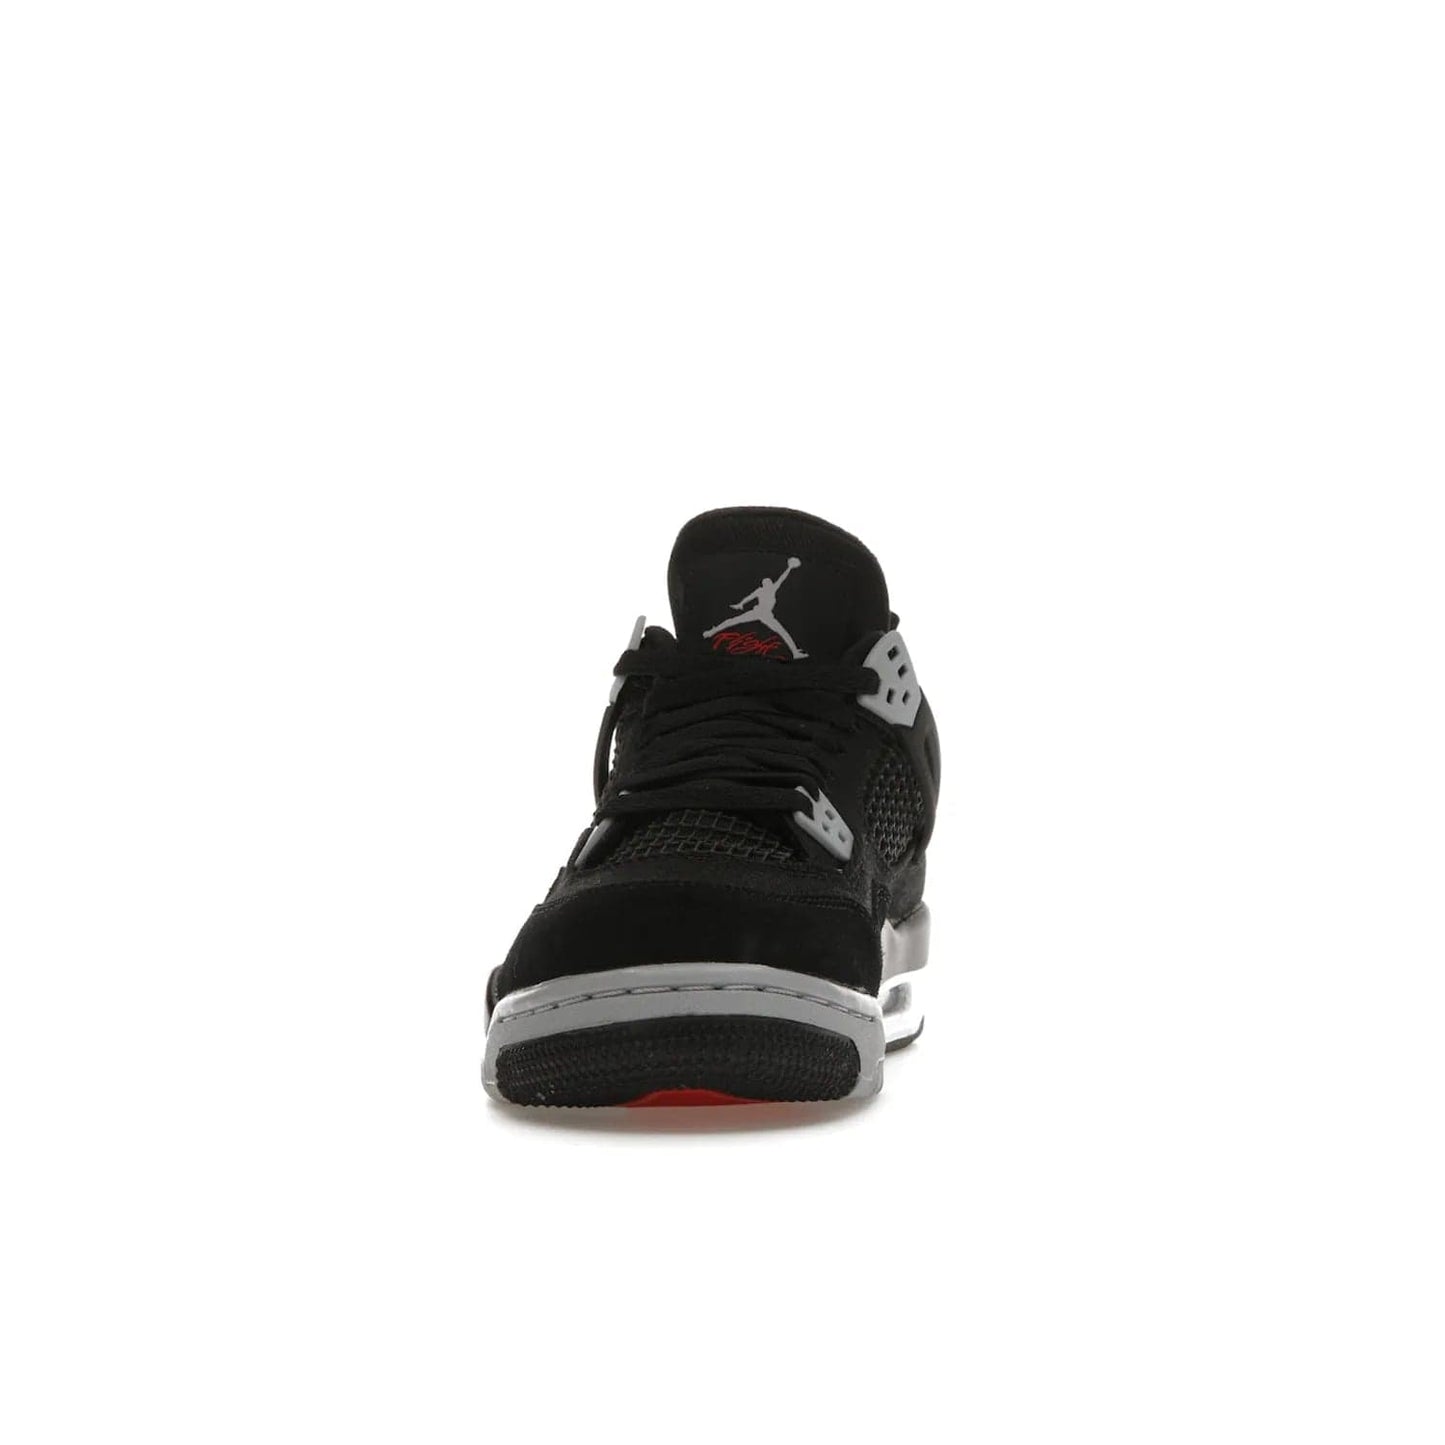 Jordan 4 Retro Black Canvas (GS) - Image 11 - Only at www.BallersClubKickz.com - Premium Air Jordan 4 Retro Black Canvas in grade-schooler's catalog. Featuring black suede canvas upper, grey molding, accents in red, white midsole, woven Jumpman tag, & visible AIR cushioning. Releasing Oct. 1, 2022.